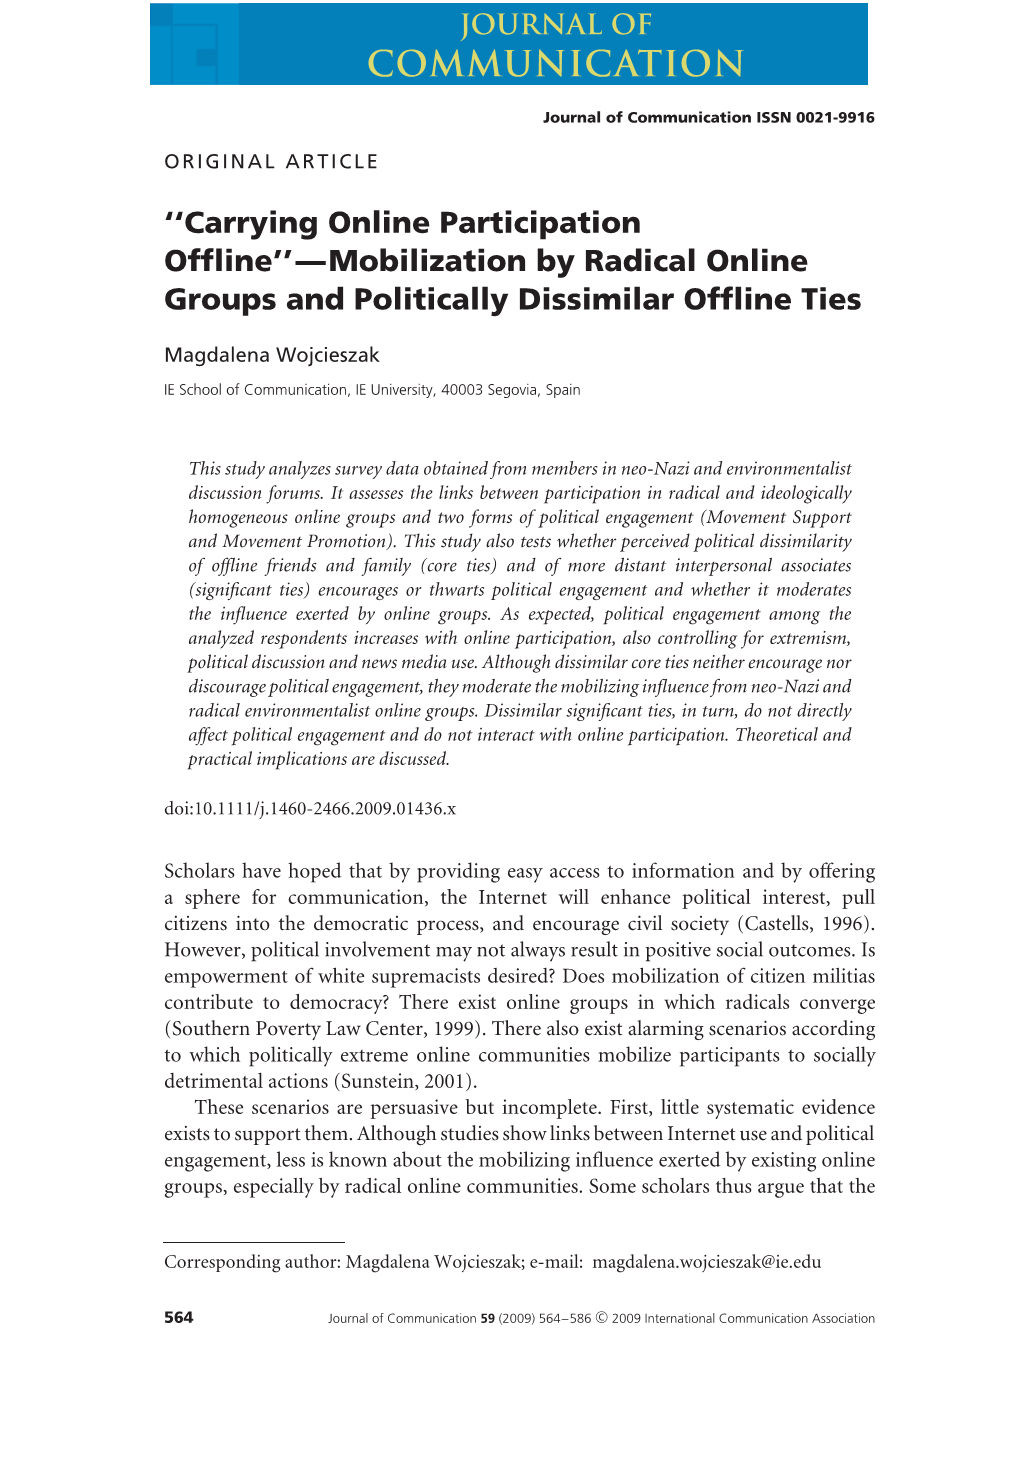 Mobilization by Radical Online Groups and Politically Dissimilar Offline